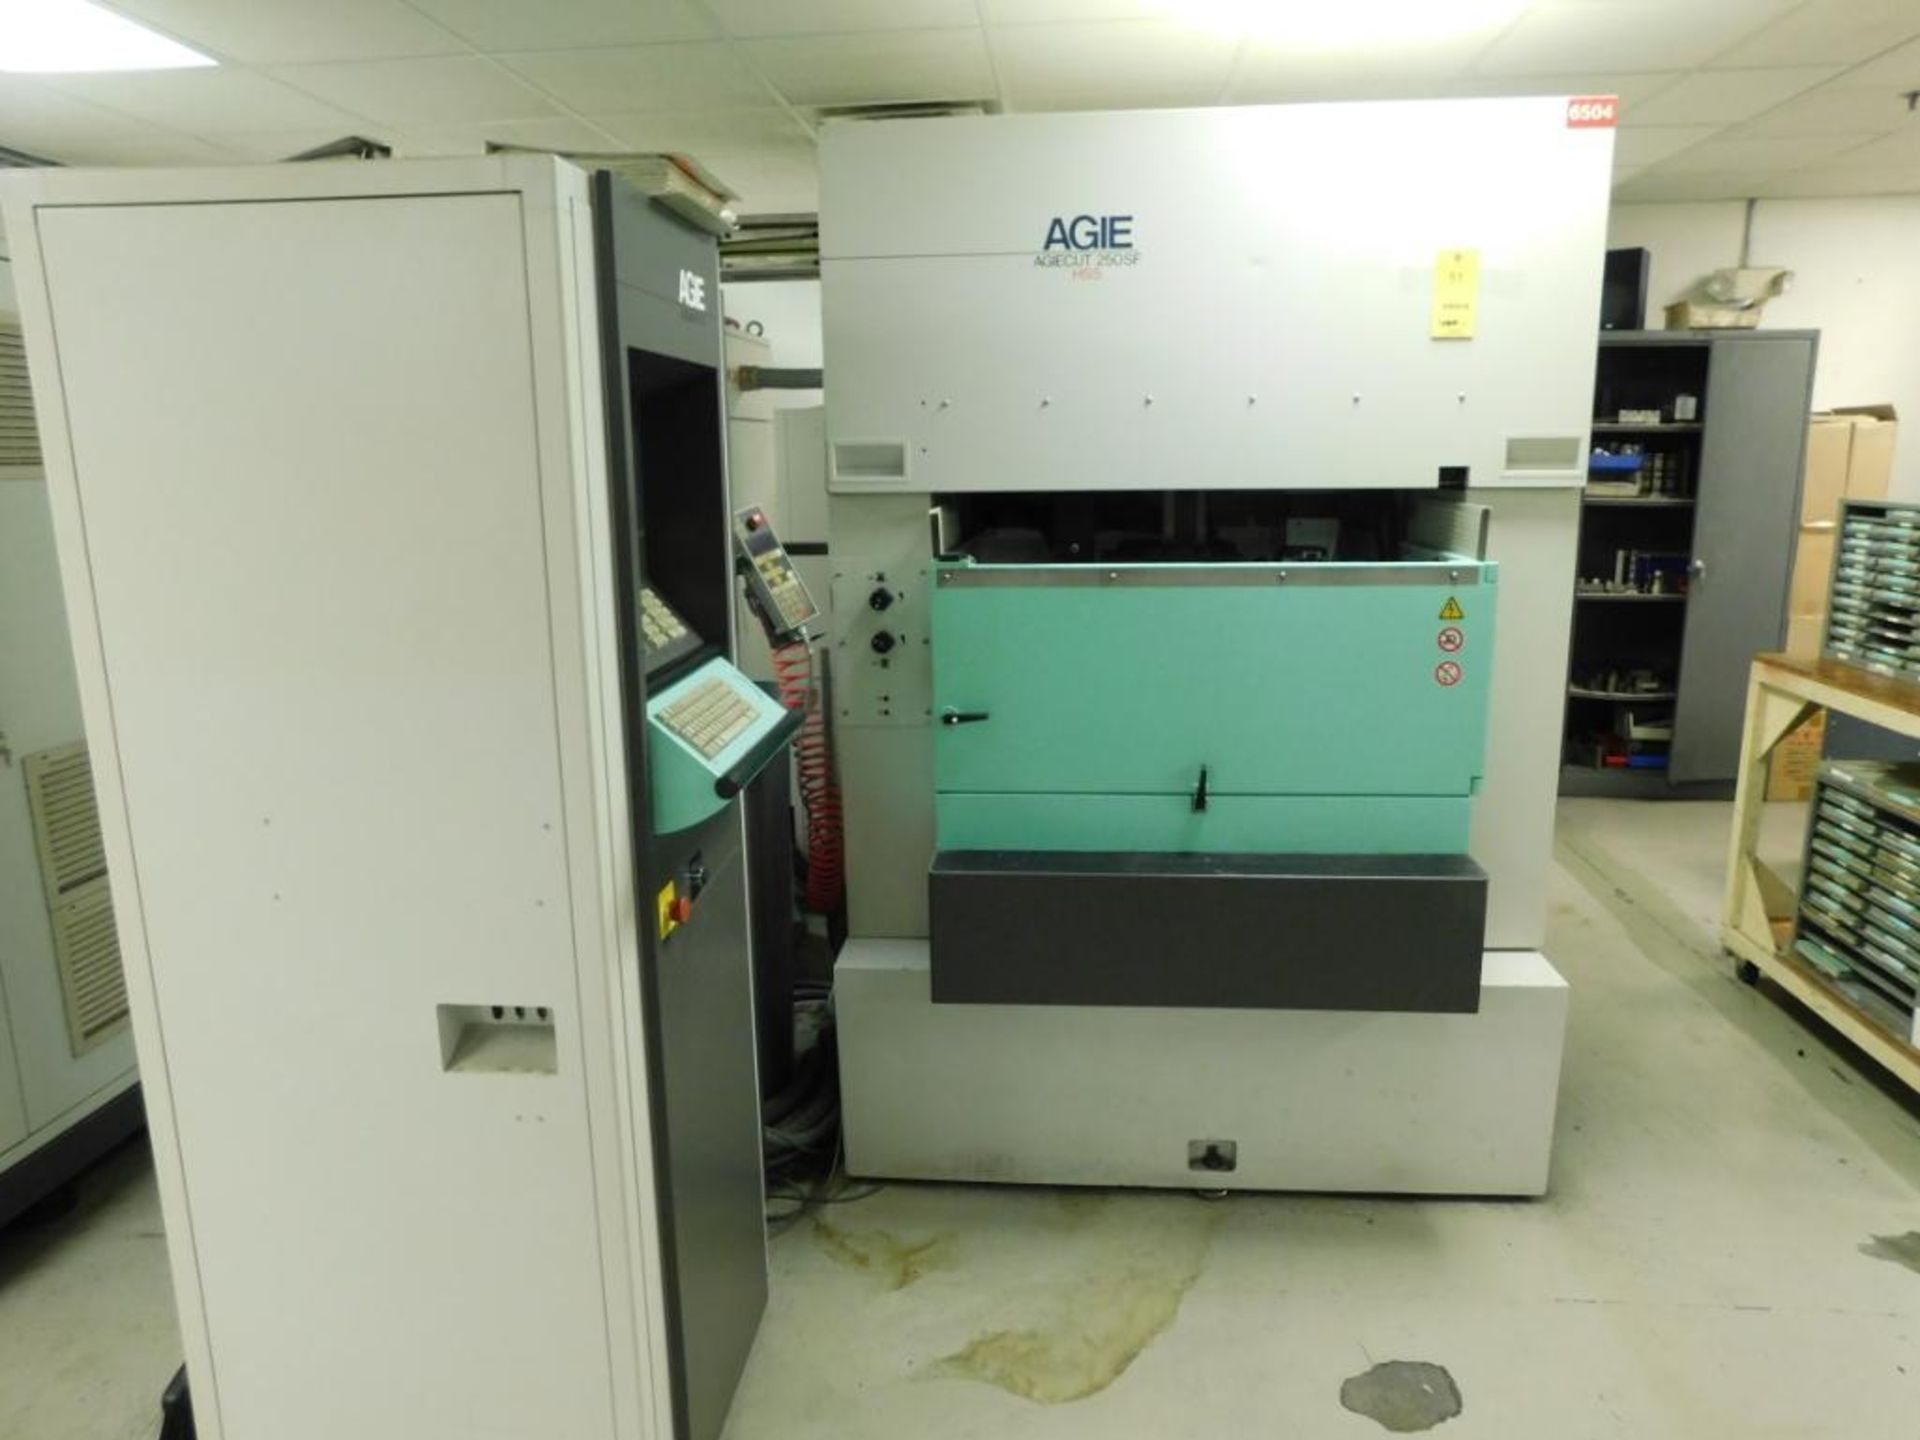 Agie CNC Wire EDM Machine, Model AgieCut 250 HSS, S/N 234-010 (1998), 15.74 in. X-Axis, 9.84 in. Y-A - Image 2 of 4